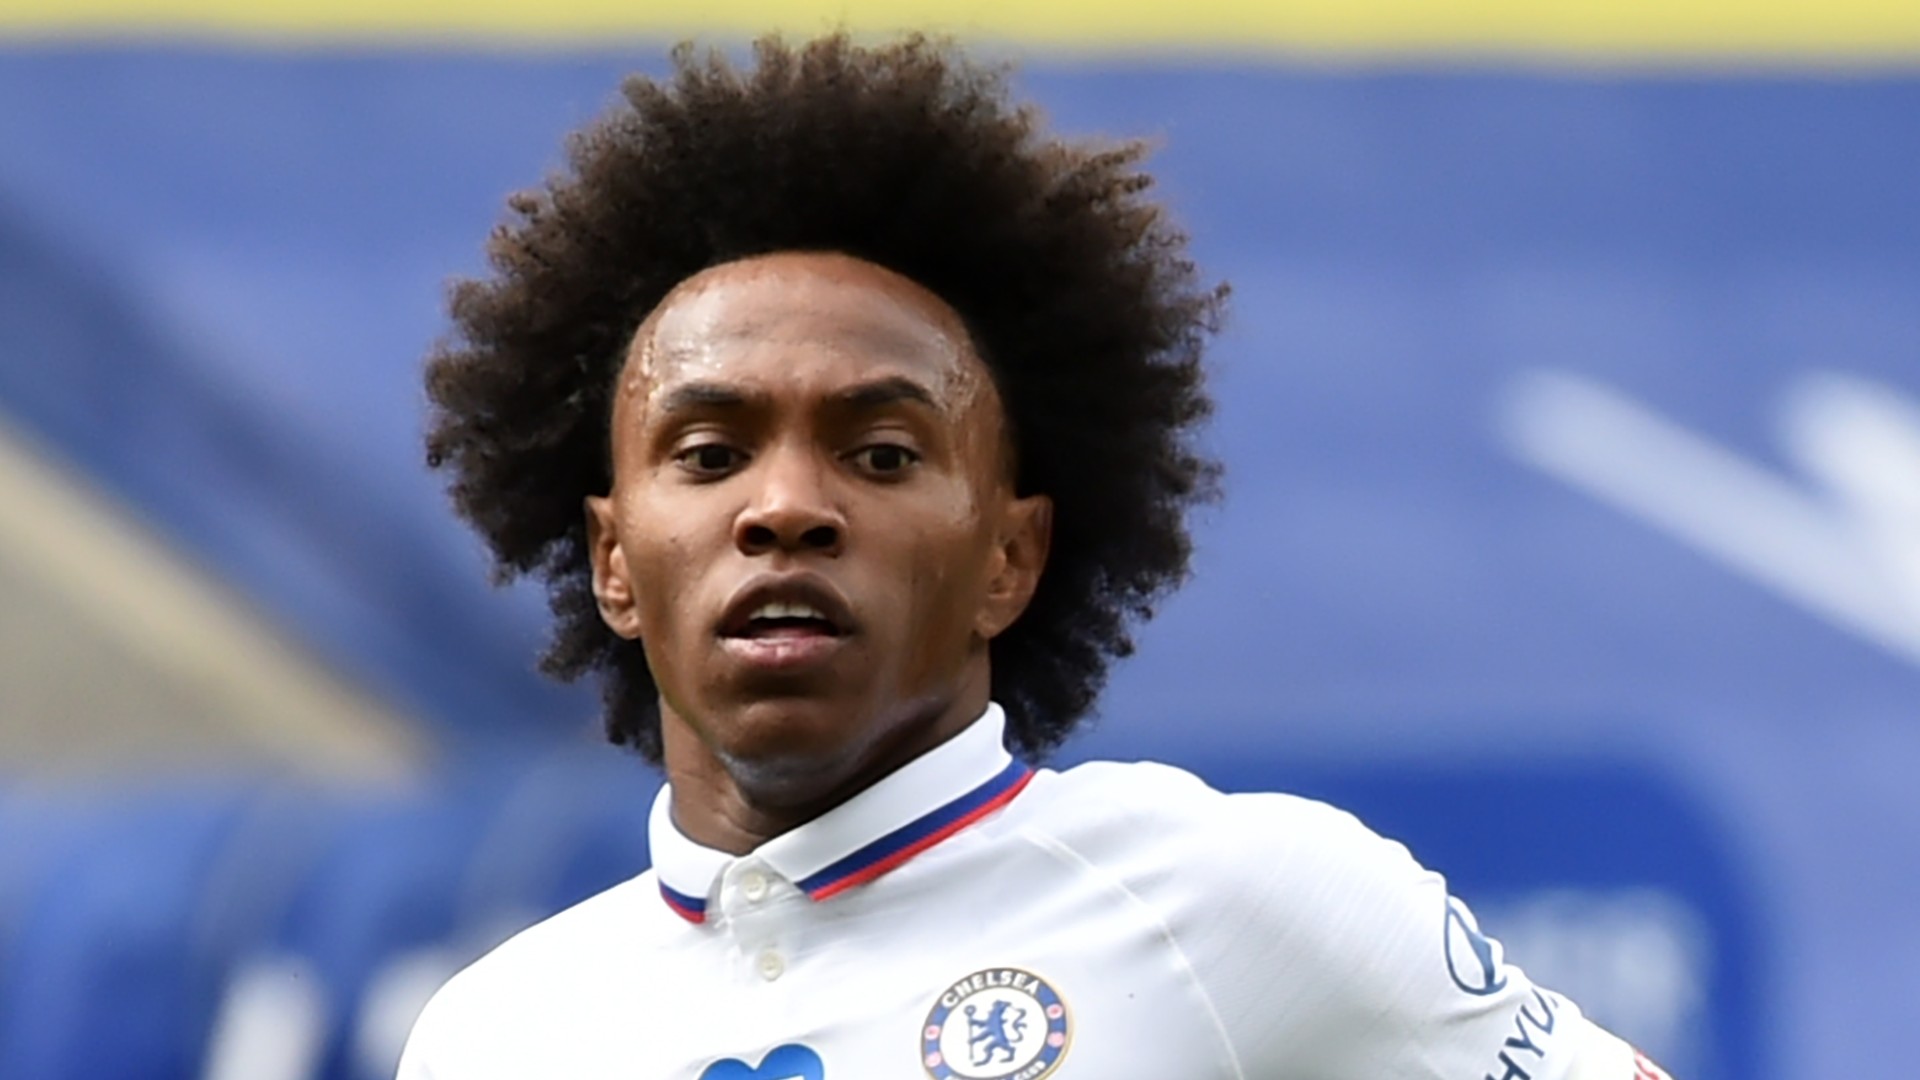 'Willian might not suit Arsenal but he'd fit in at Spurs' - Mourinho reunion could be on the cards, says Bent